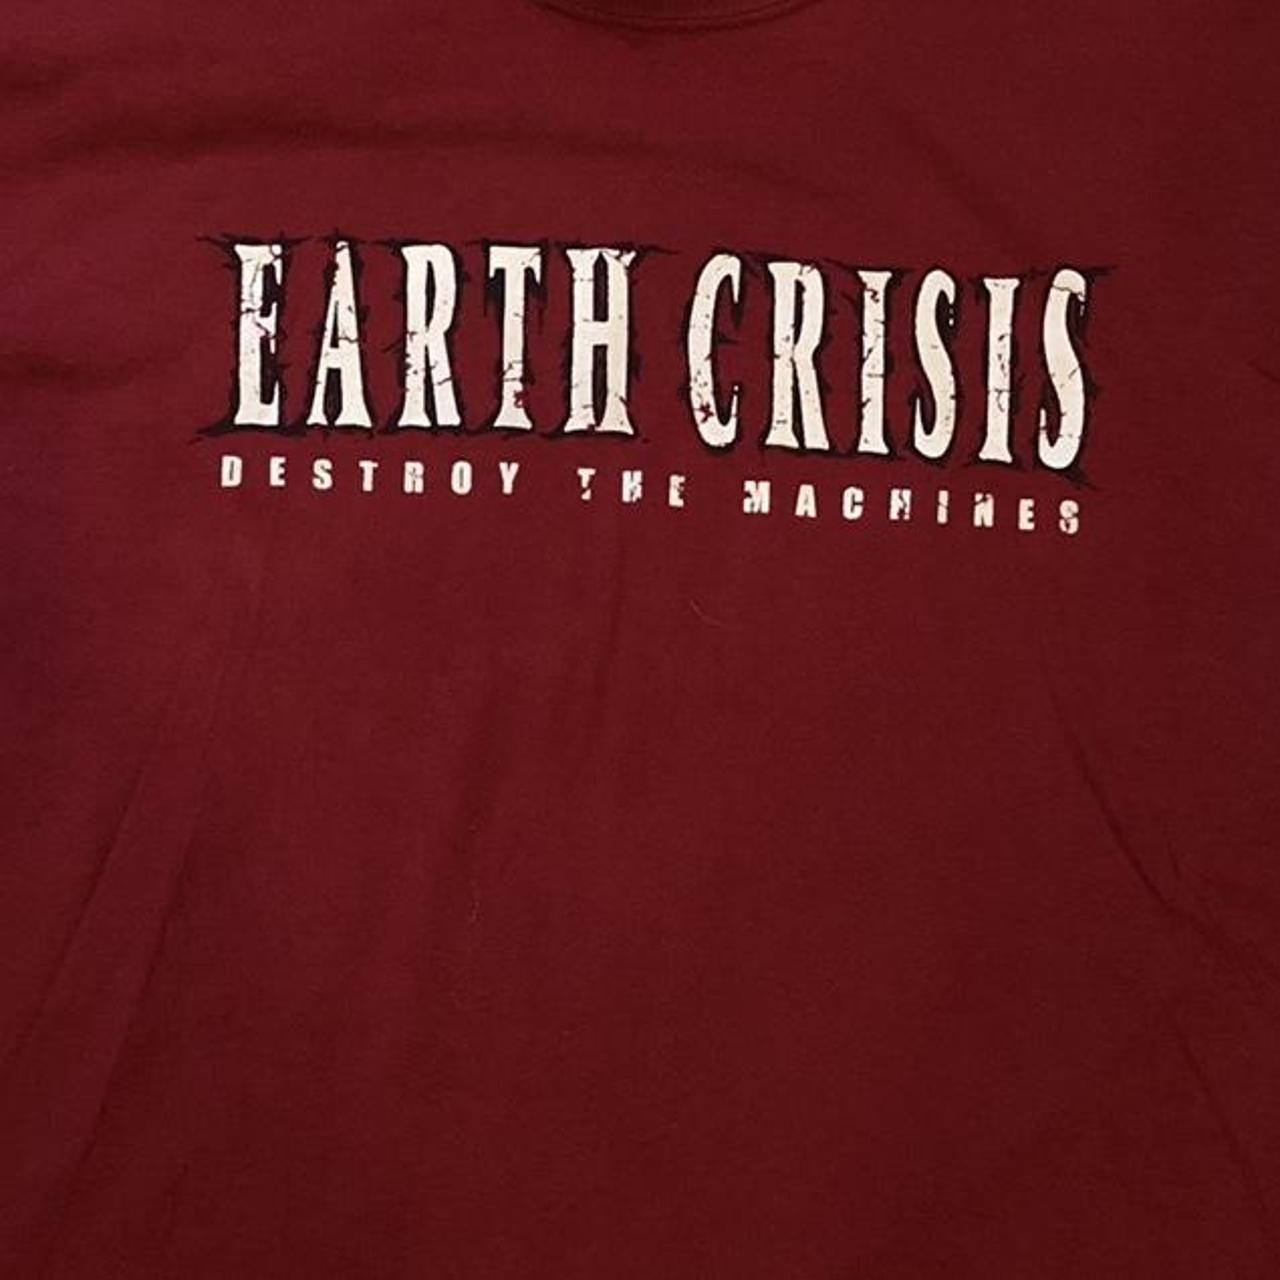 Product Image 3 - Earth Crisis “Destroy the Machines”